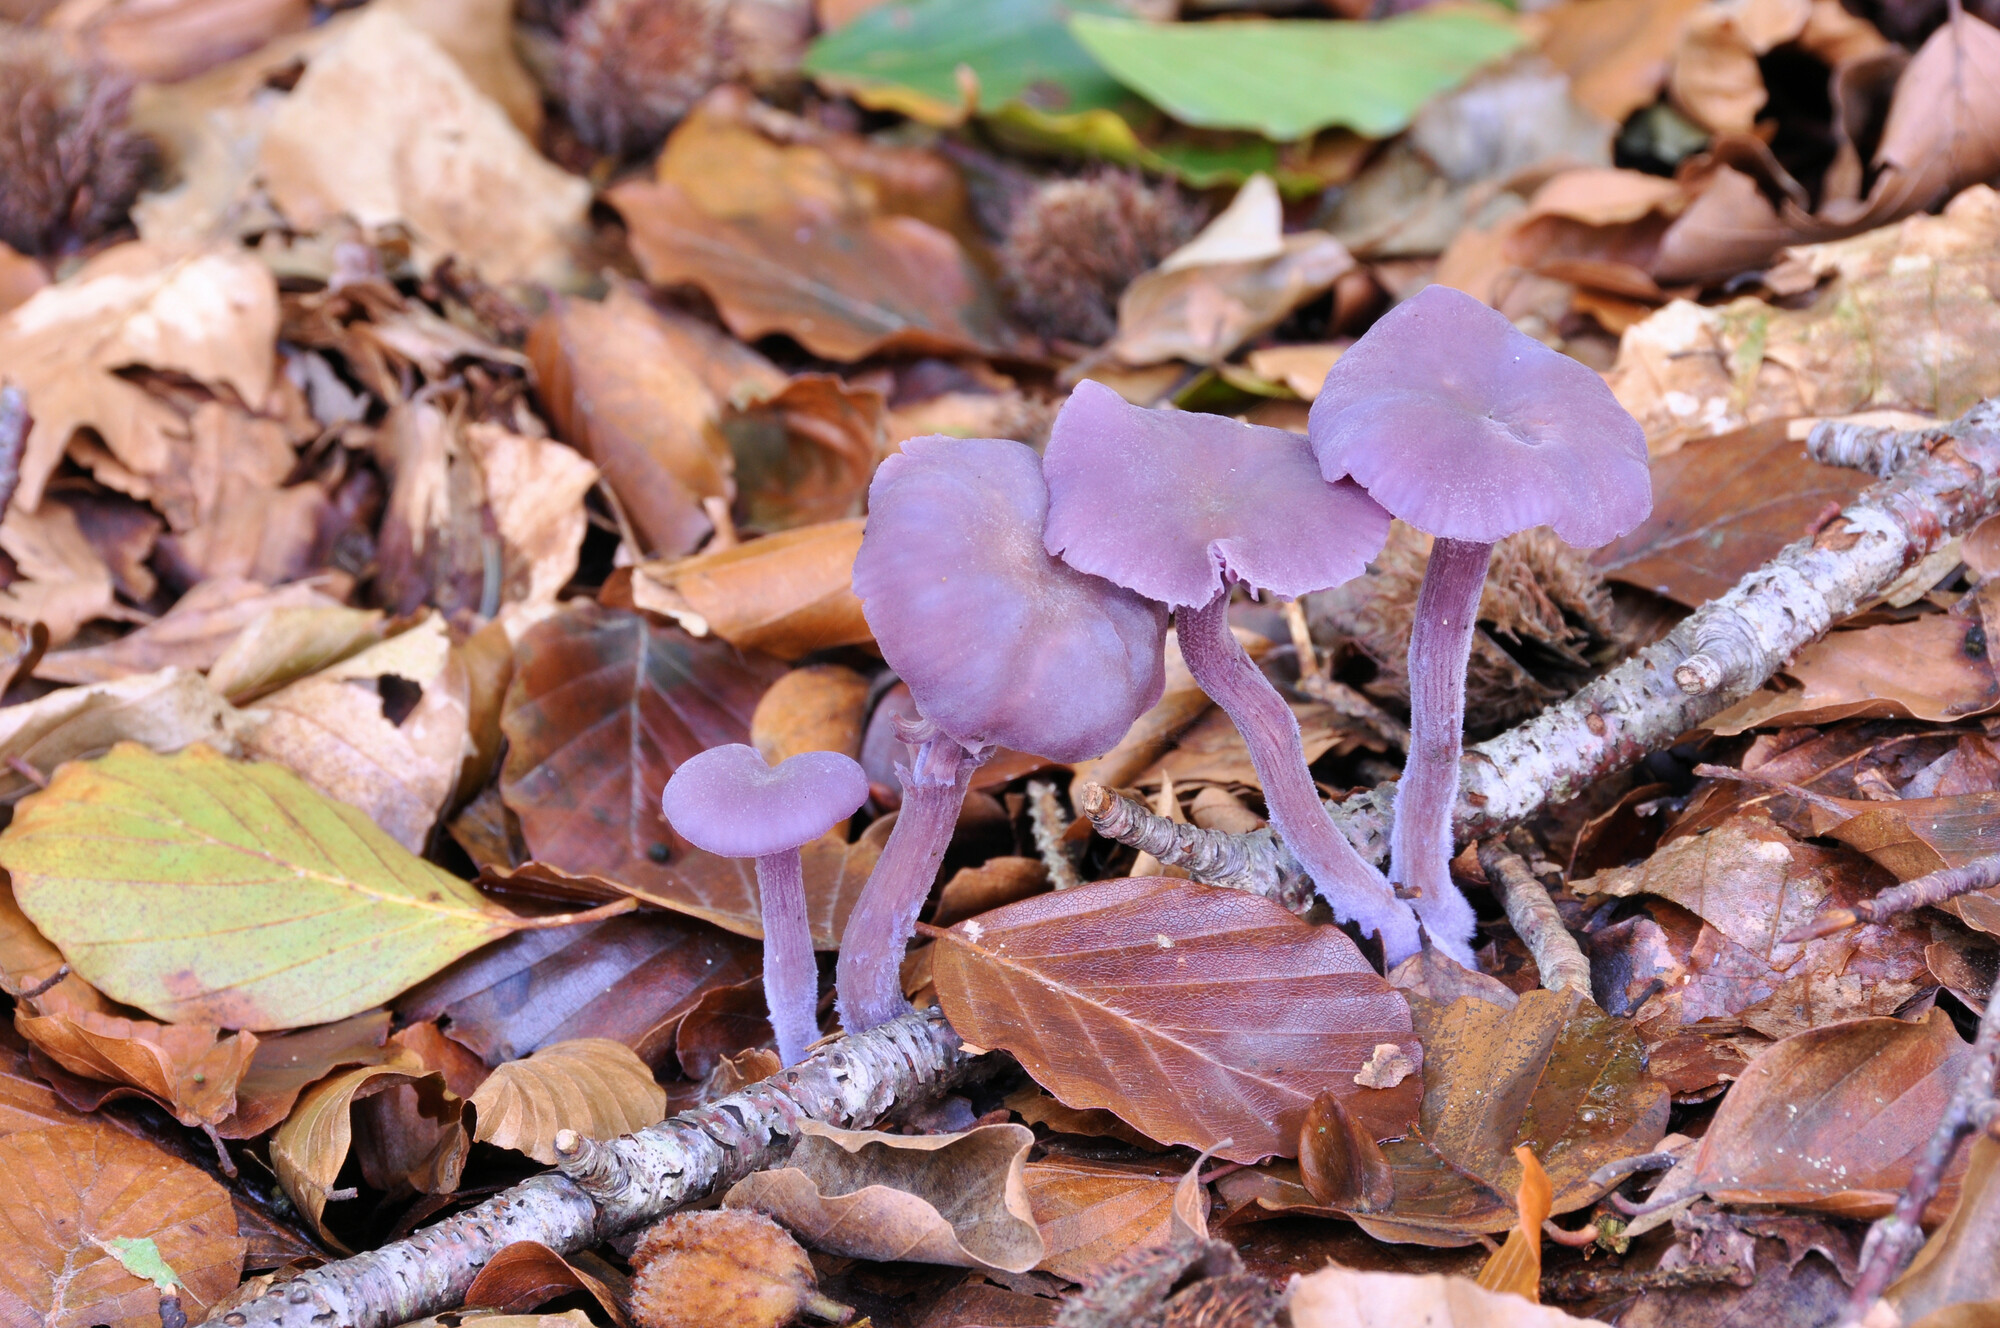 A clump of amethyst deceiver fungi amongst autumn leaves on the Forest floor.